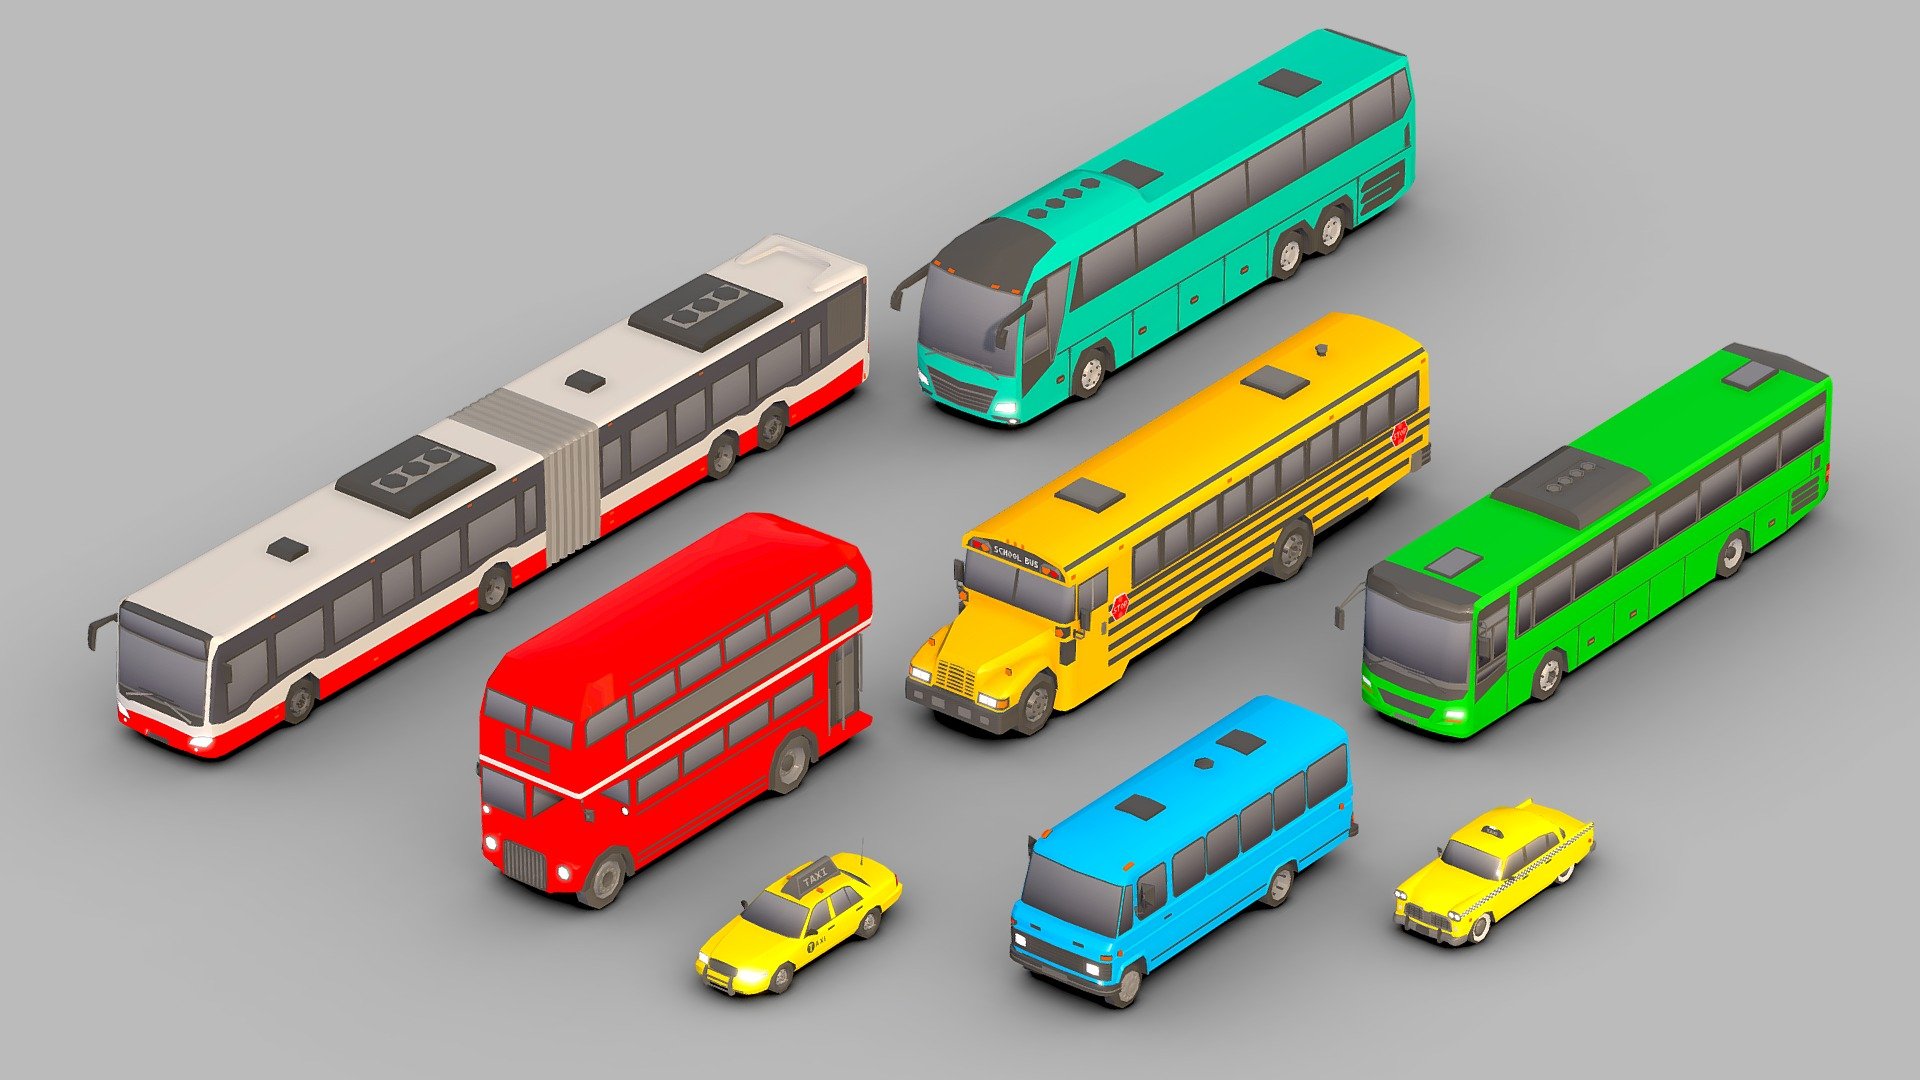 Low Poly Bus Pack.

You can use these models in any game and project.

This package includes 8 Models .

This model is made with order and precision.

Separated parts (body. wheel).

The color of the body can be changed.

The body color of taxi and school bus does not change.

Very low poly.

Average poly count: 5/000 Tris.

Texture size: 256 (PNG).

Number of textures: 1.

Number of materials: 1.

format: fbx, obj, 3d max - Low Poly Bus Pack - Buy Royalty Free 3D model by Sidra (@Sidramax) 3d model